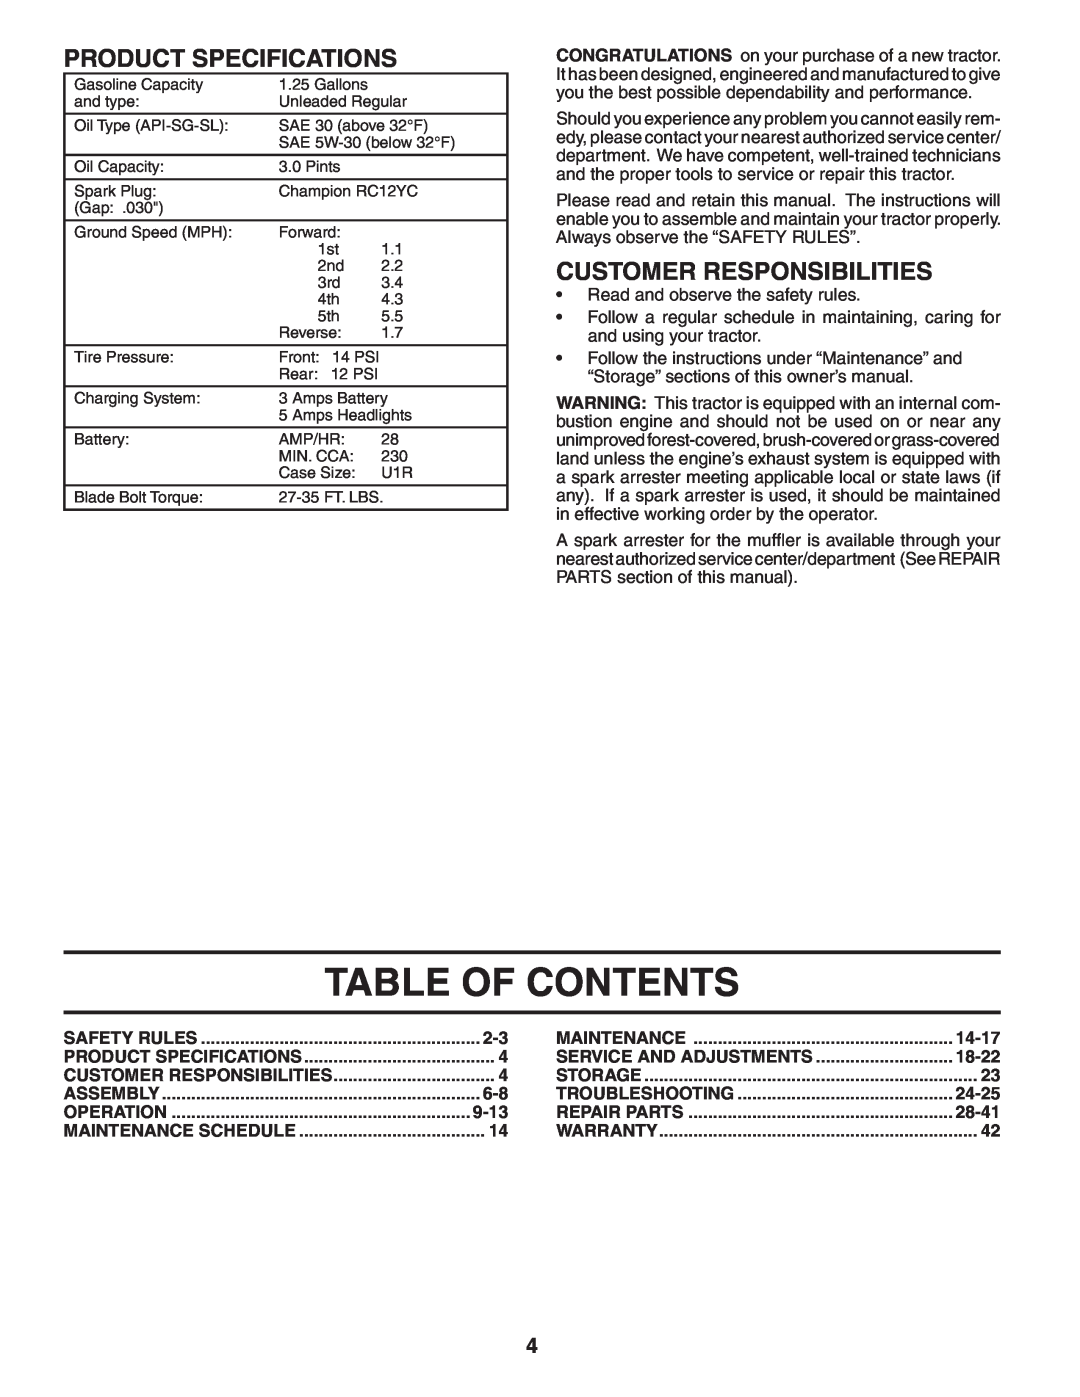 Poulan 192666 manual Table Of Contents, Product Specifications, Customer Responsibilities 